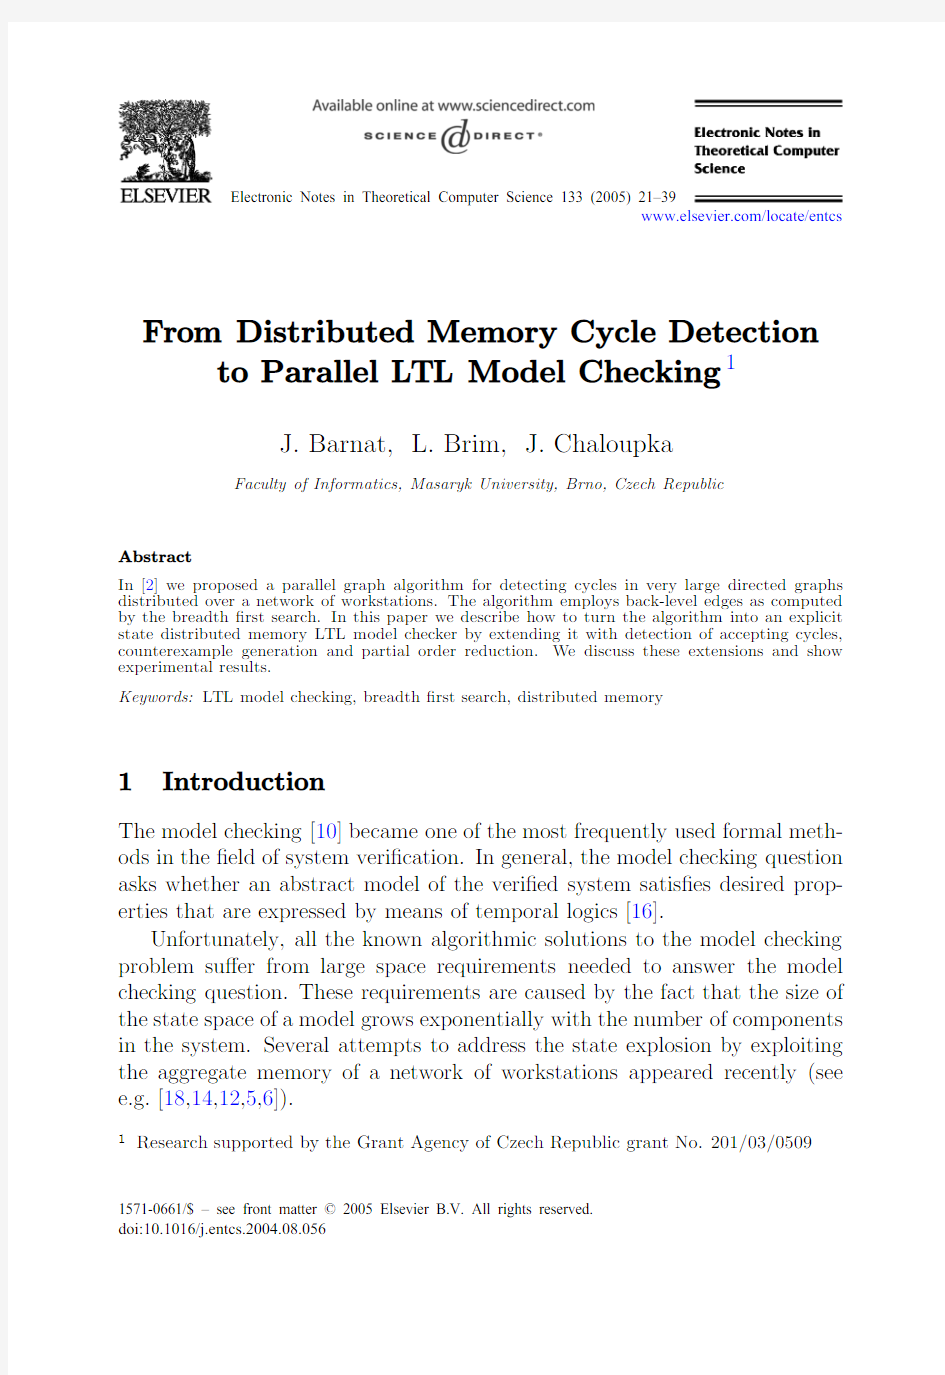 From distribution memory cycle detection to parallel model checking